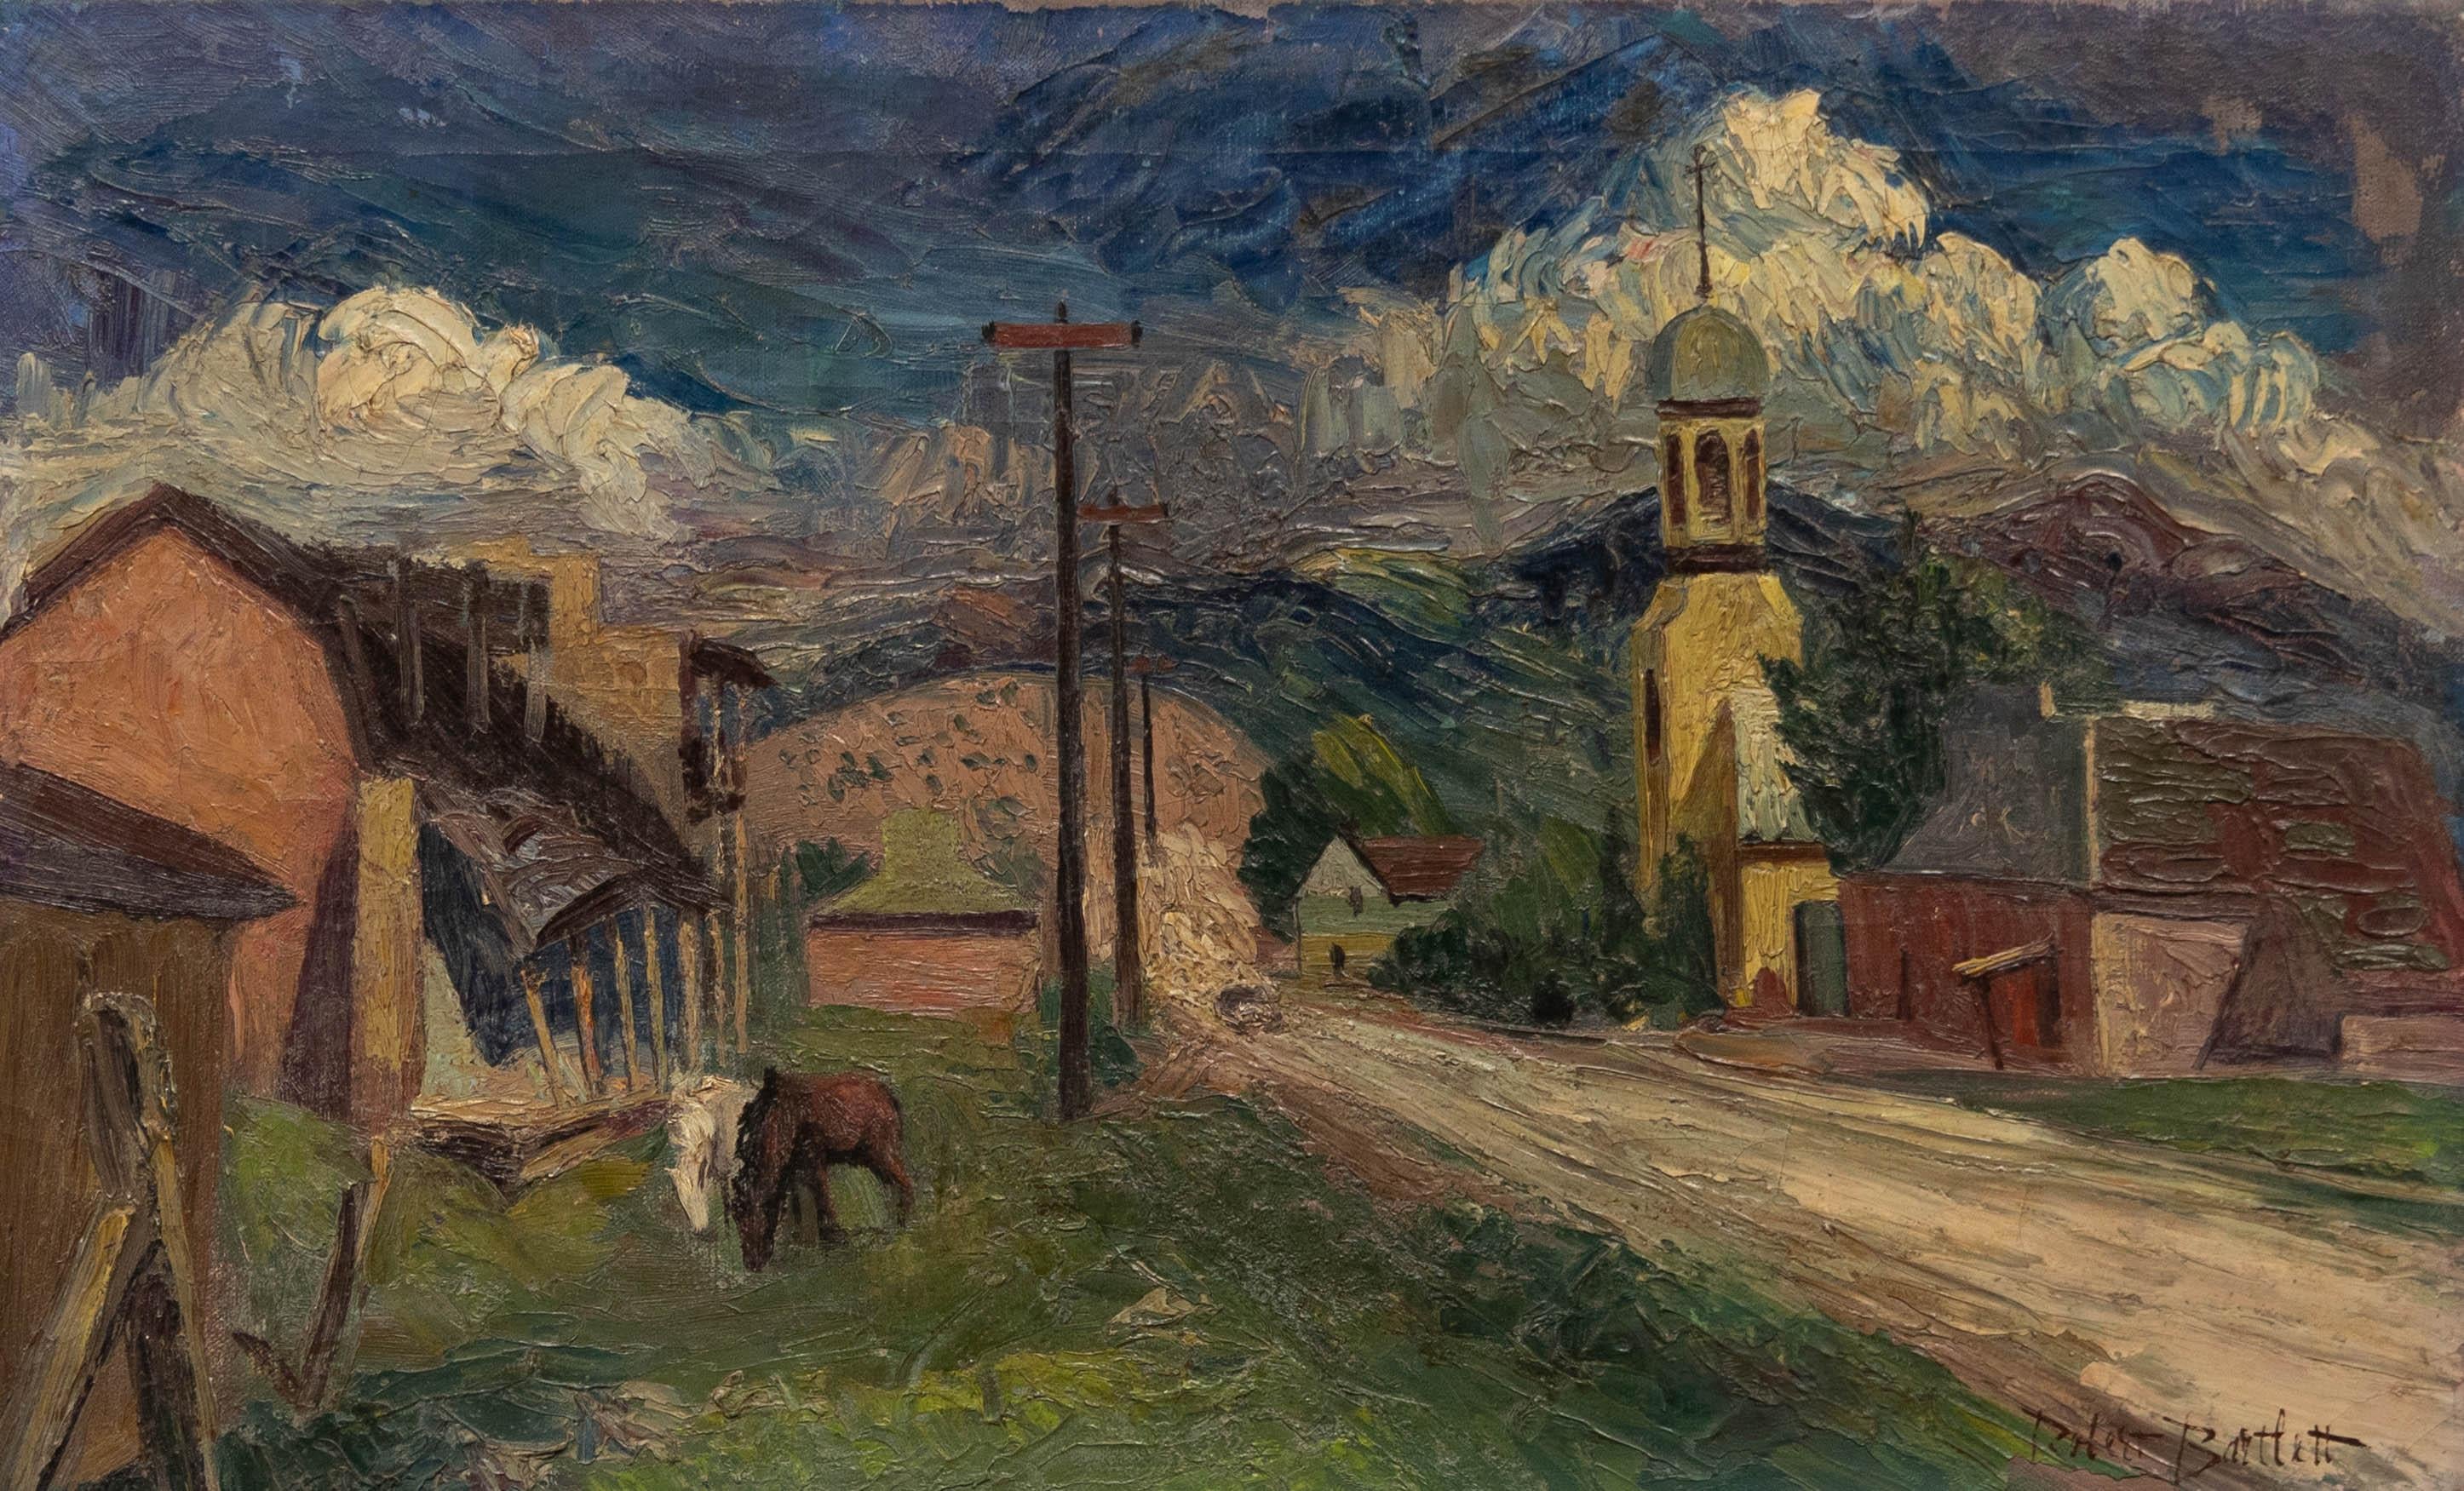 Robert Bartlett - Mid 20th Century Oil, Townscape with Roaming Horses - Painting by Unknown